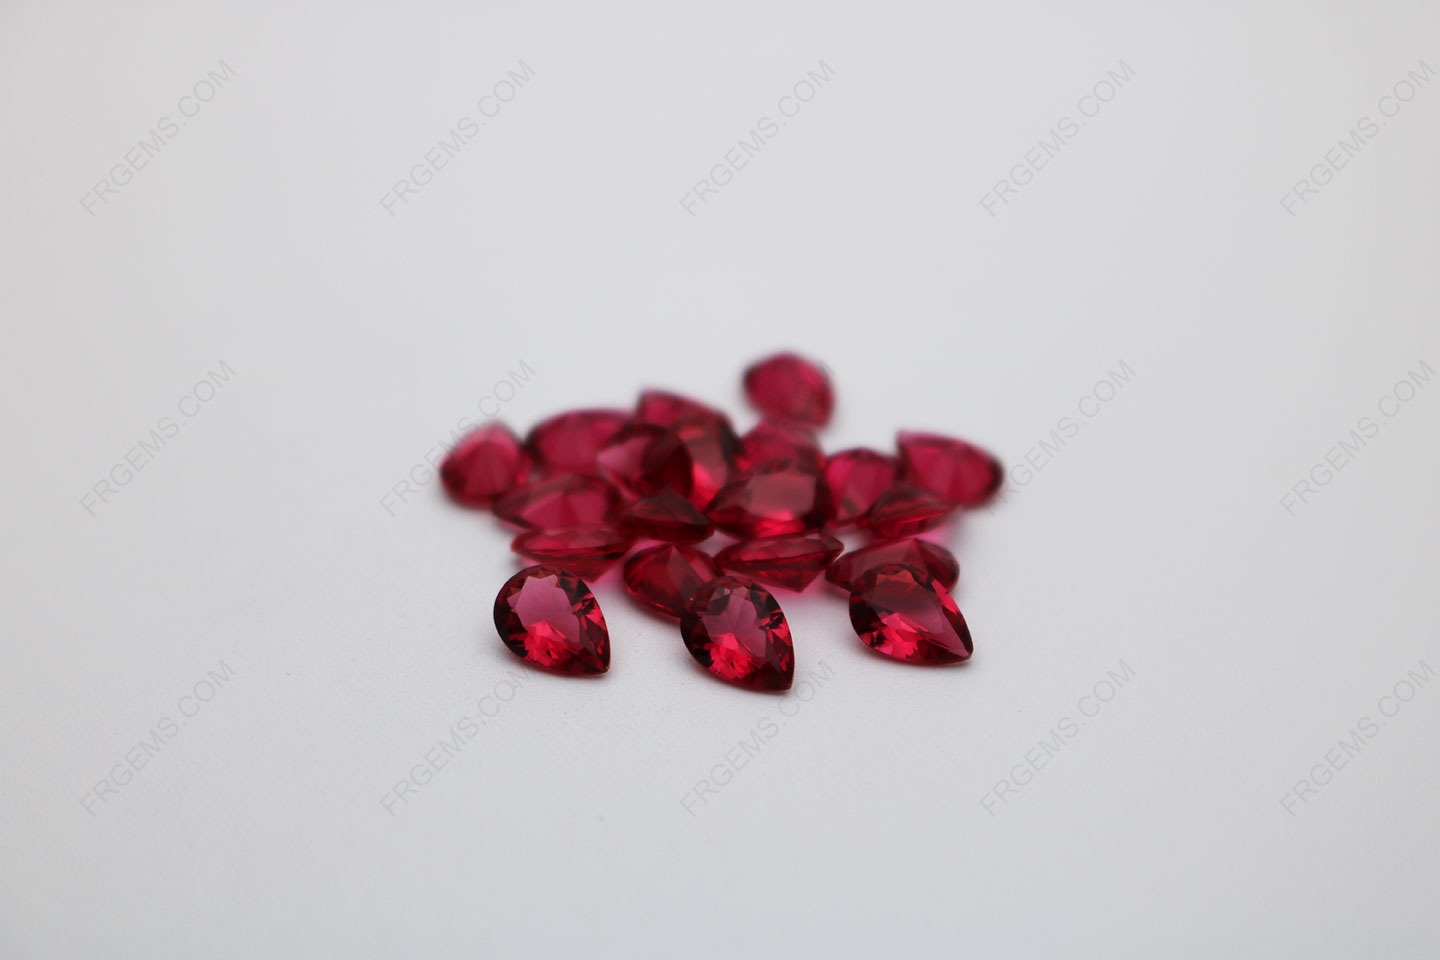 Synthetic Lab Created Corundum Ruby Red 5# Pear Shape Faceted Cut 7x5mm gemstones